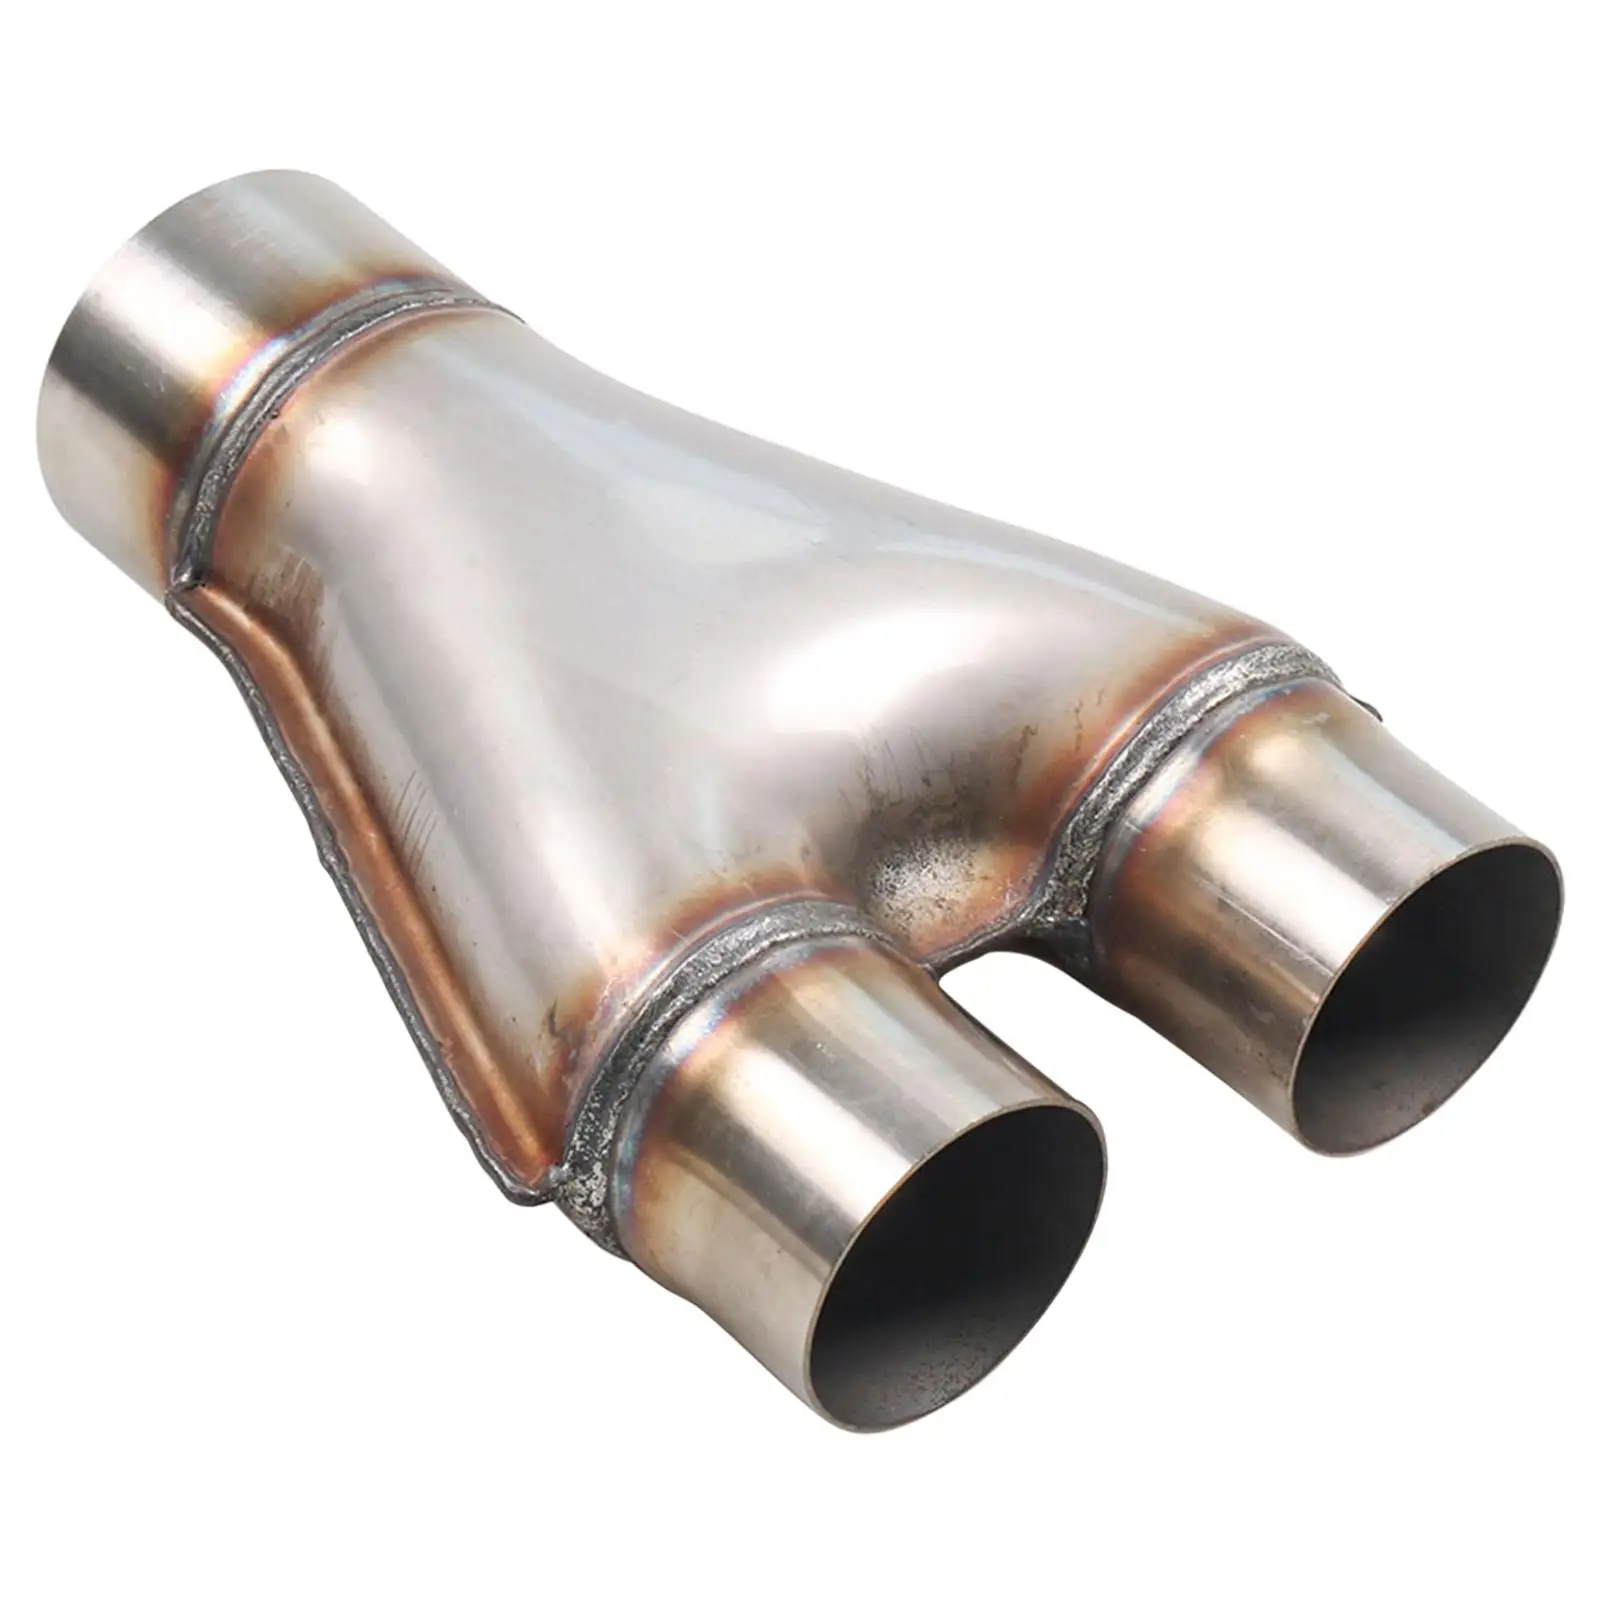 3-Way Pipe Adapter 2